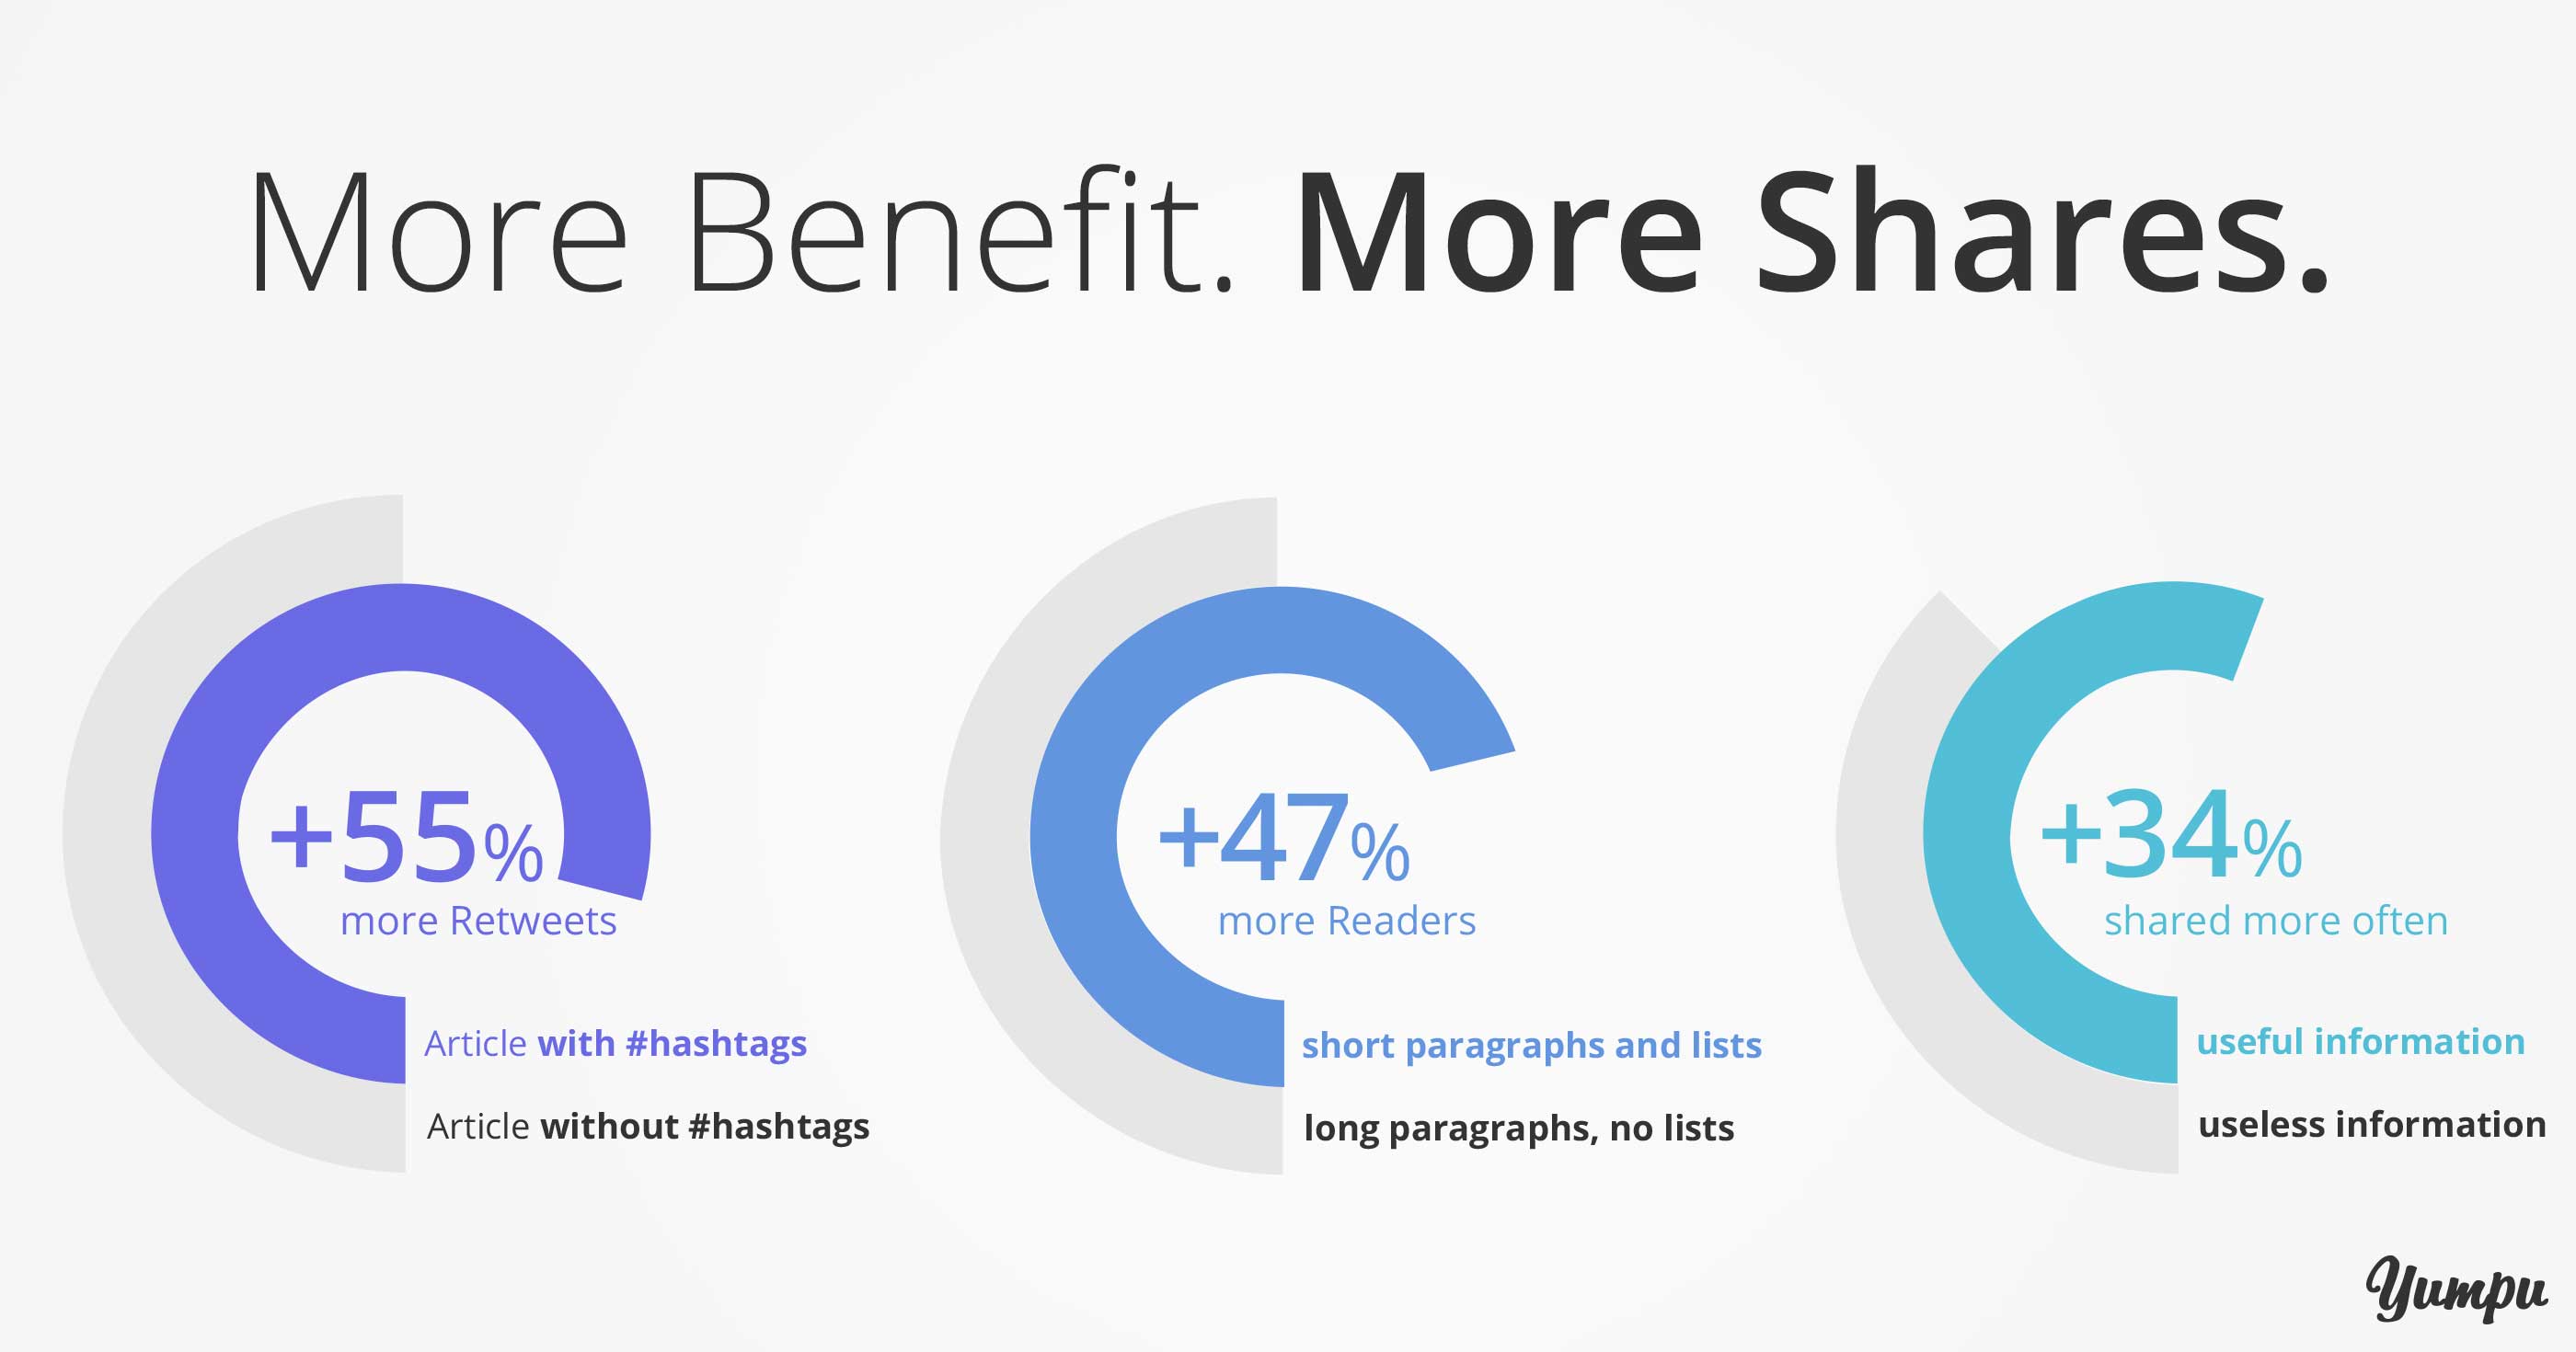 More Benefit - More Shares